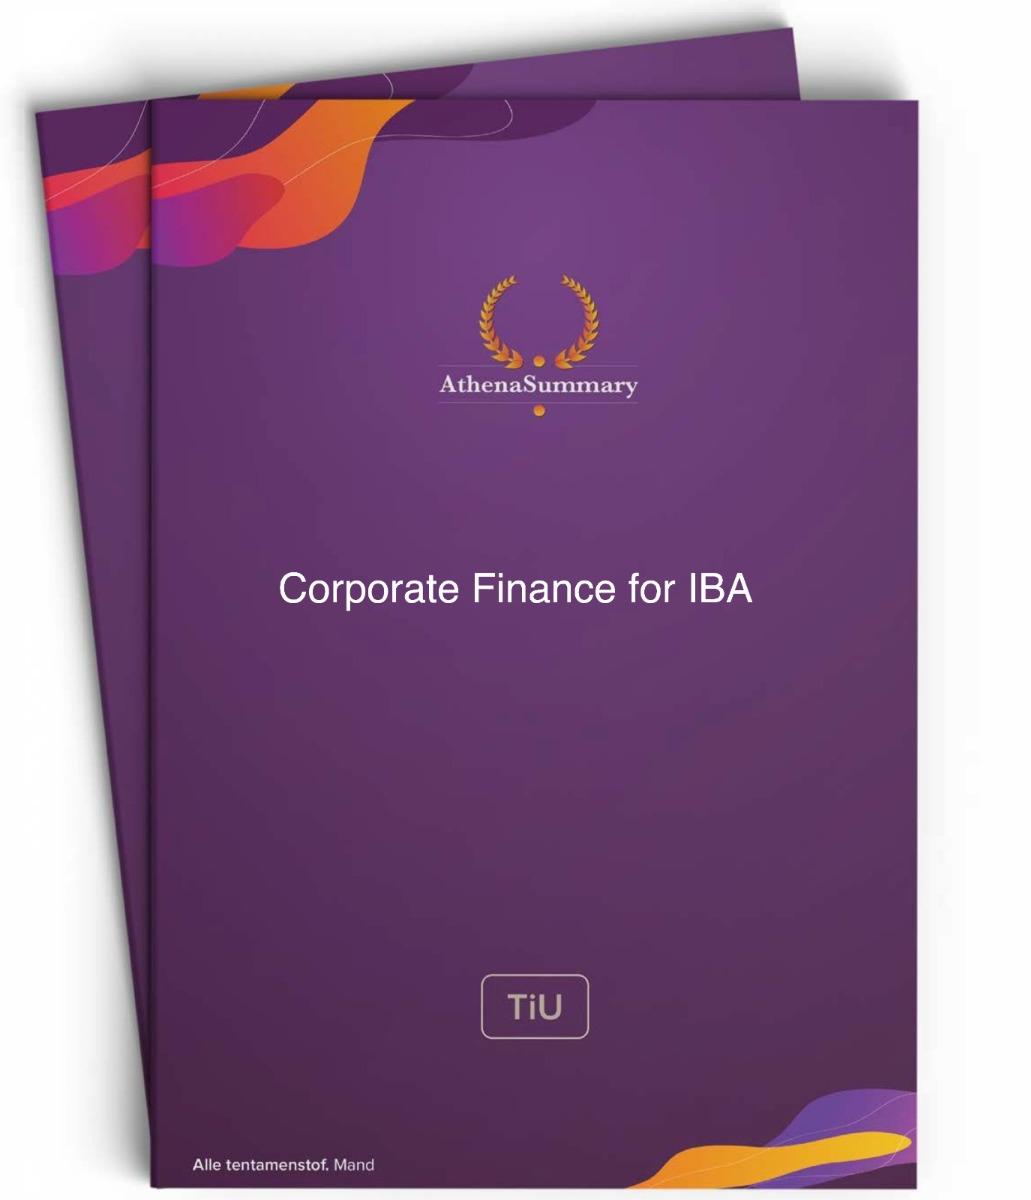 Literature and Lecture Summary: Corporate Finance for IBA